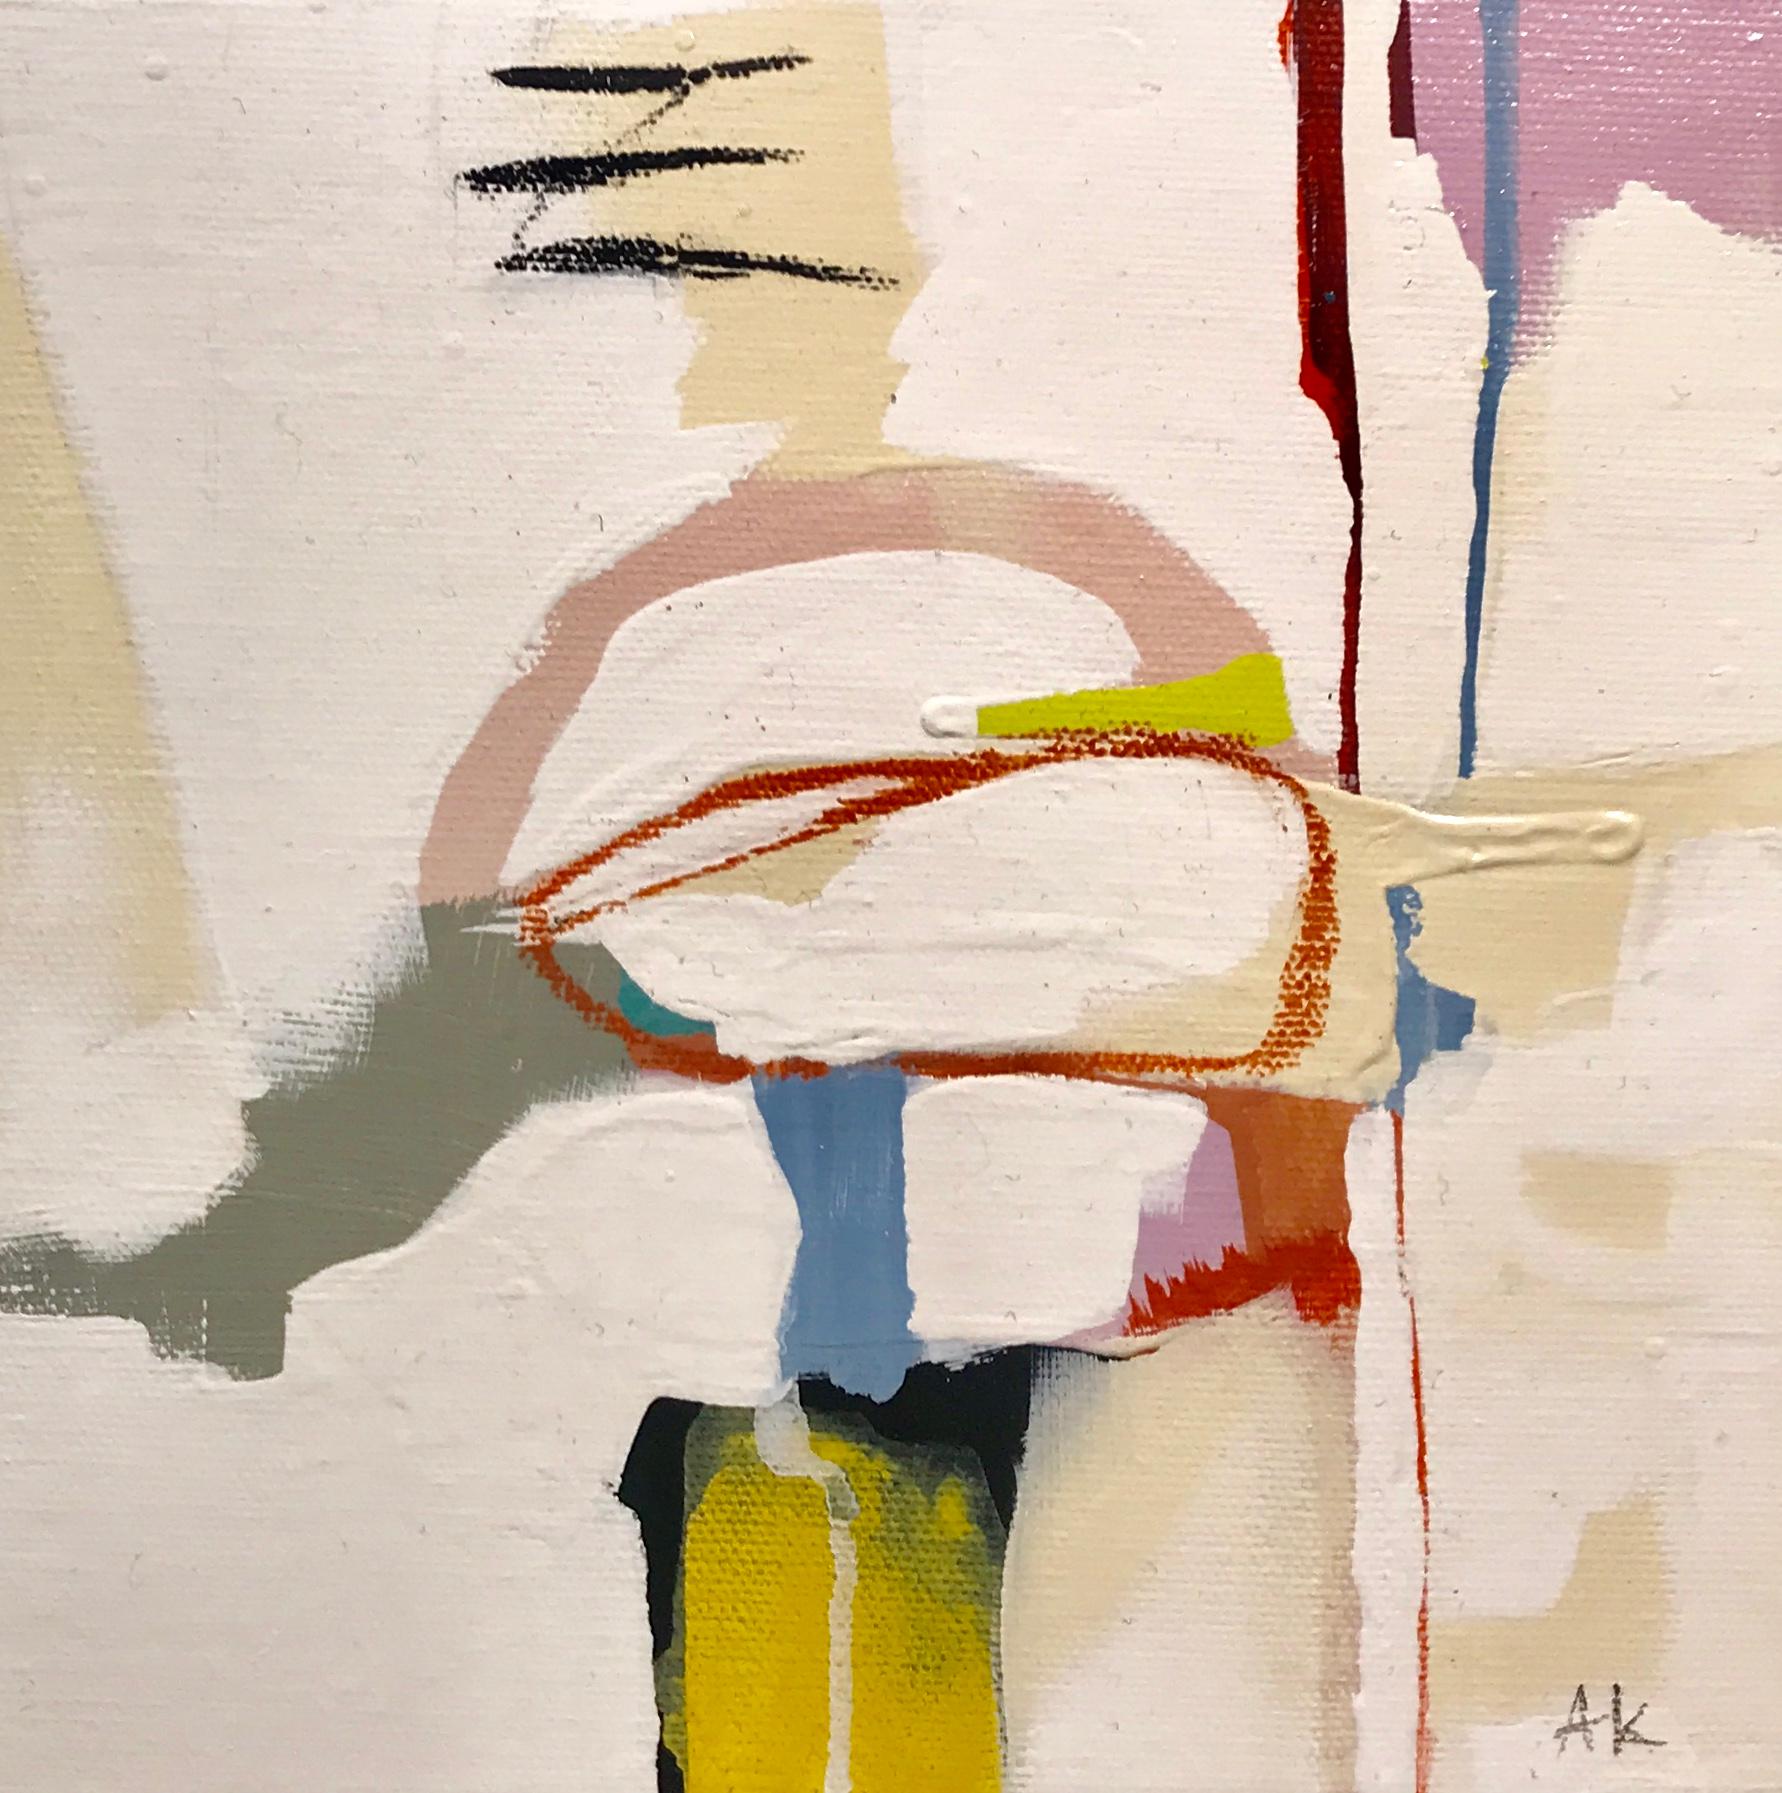 'Abstracted 03' is a small abstract acrylic and charcoal on canvas painting created by American artist Annie King is 2018. Featuring a palette mostly made of cream, white, pink, green and yellow colors delicately accented with touches of blue, black